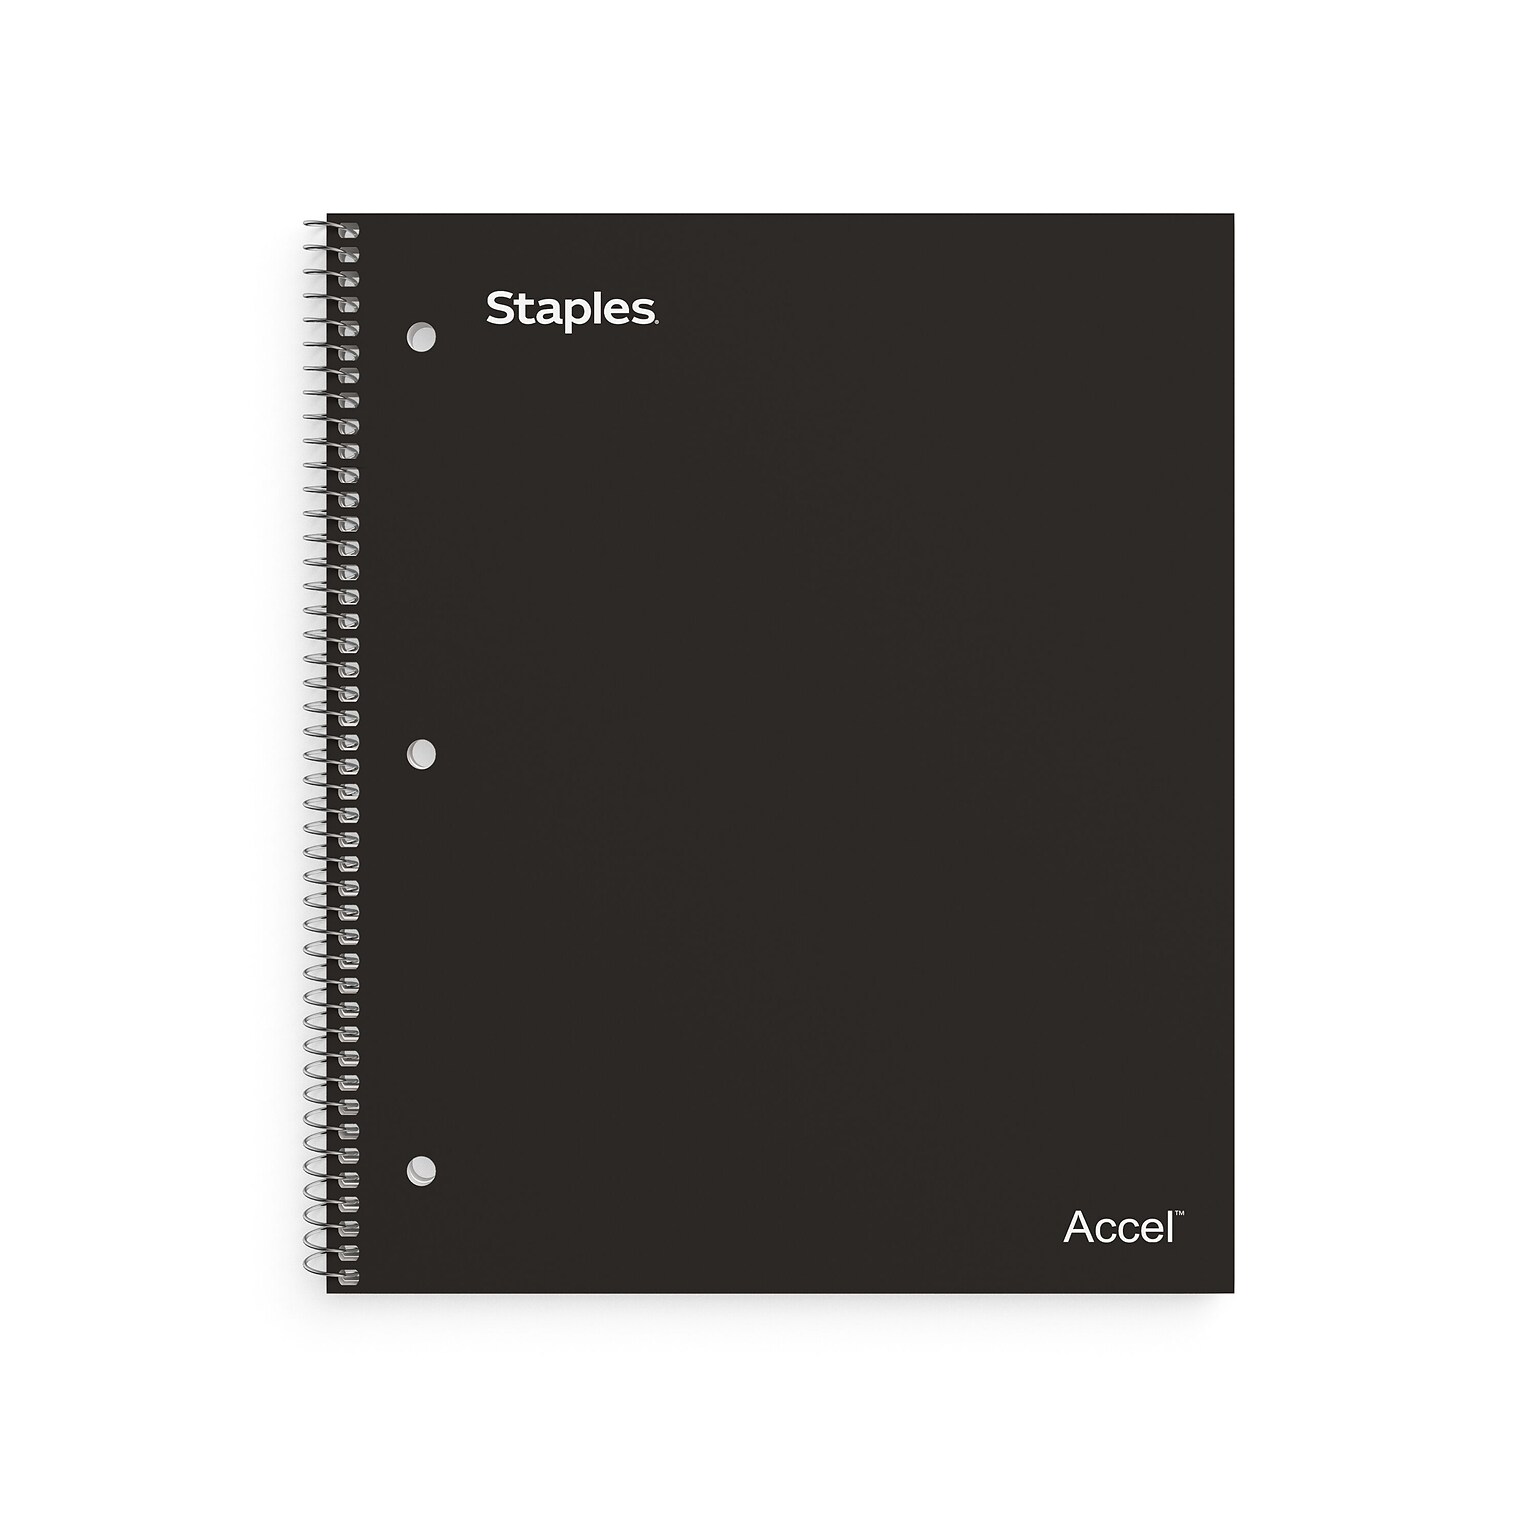 Staples Premium 1-Subject Notebook, 8.5 x 11, College Ruled, 100 Sheets, Black (ST20950D)